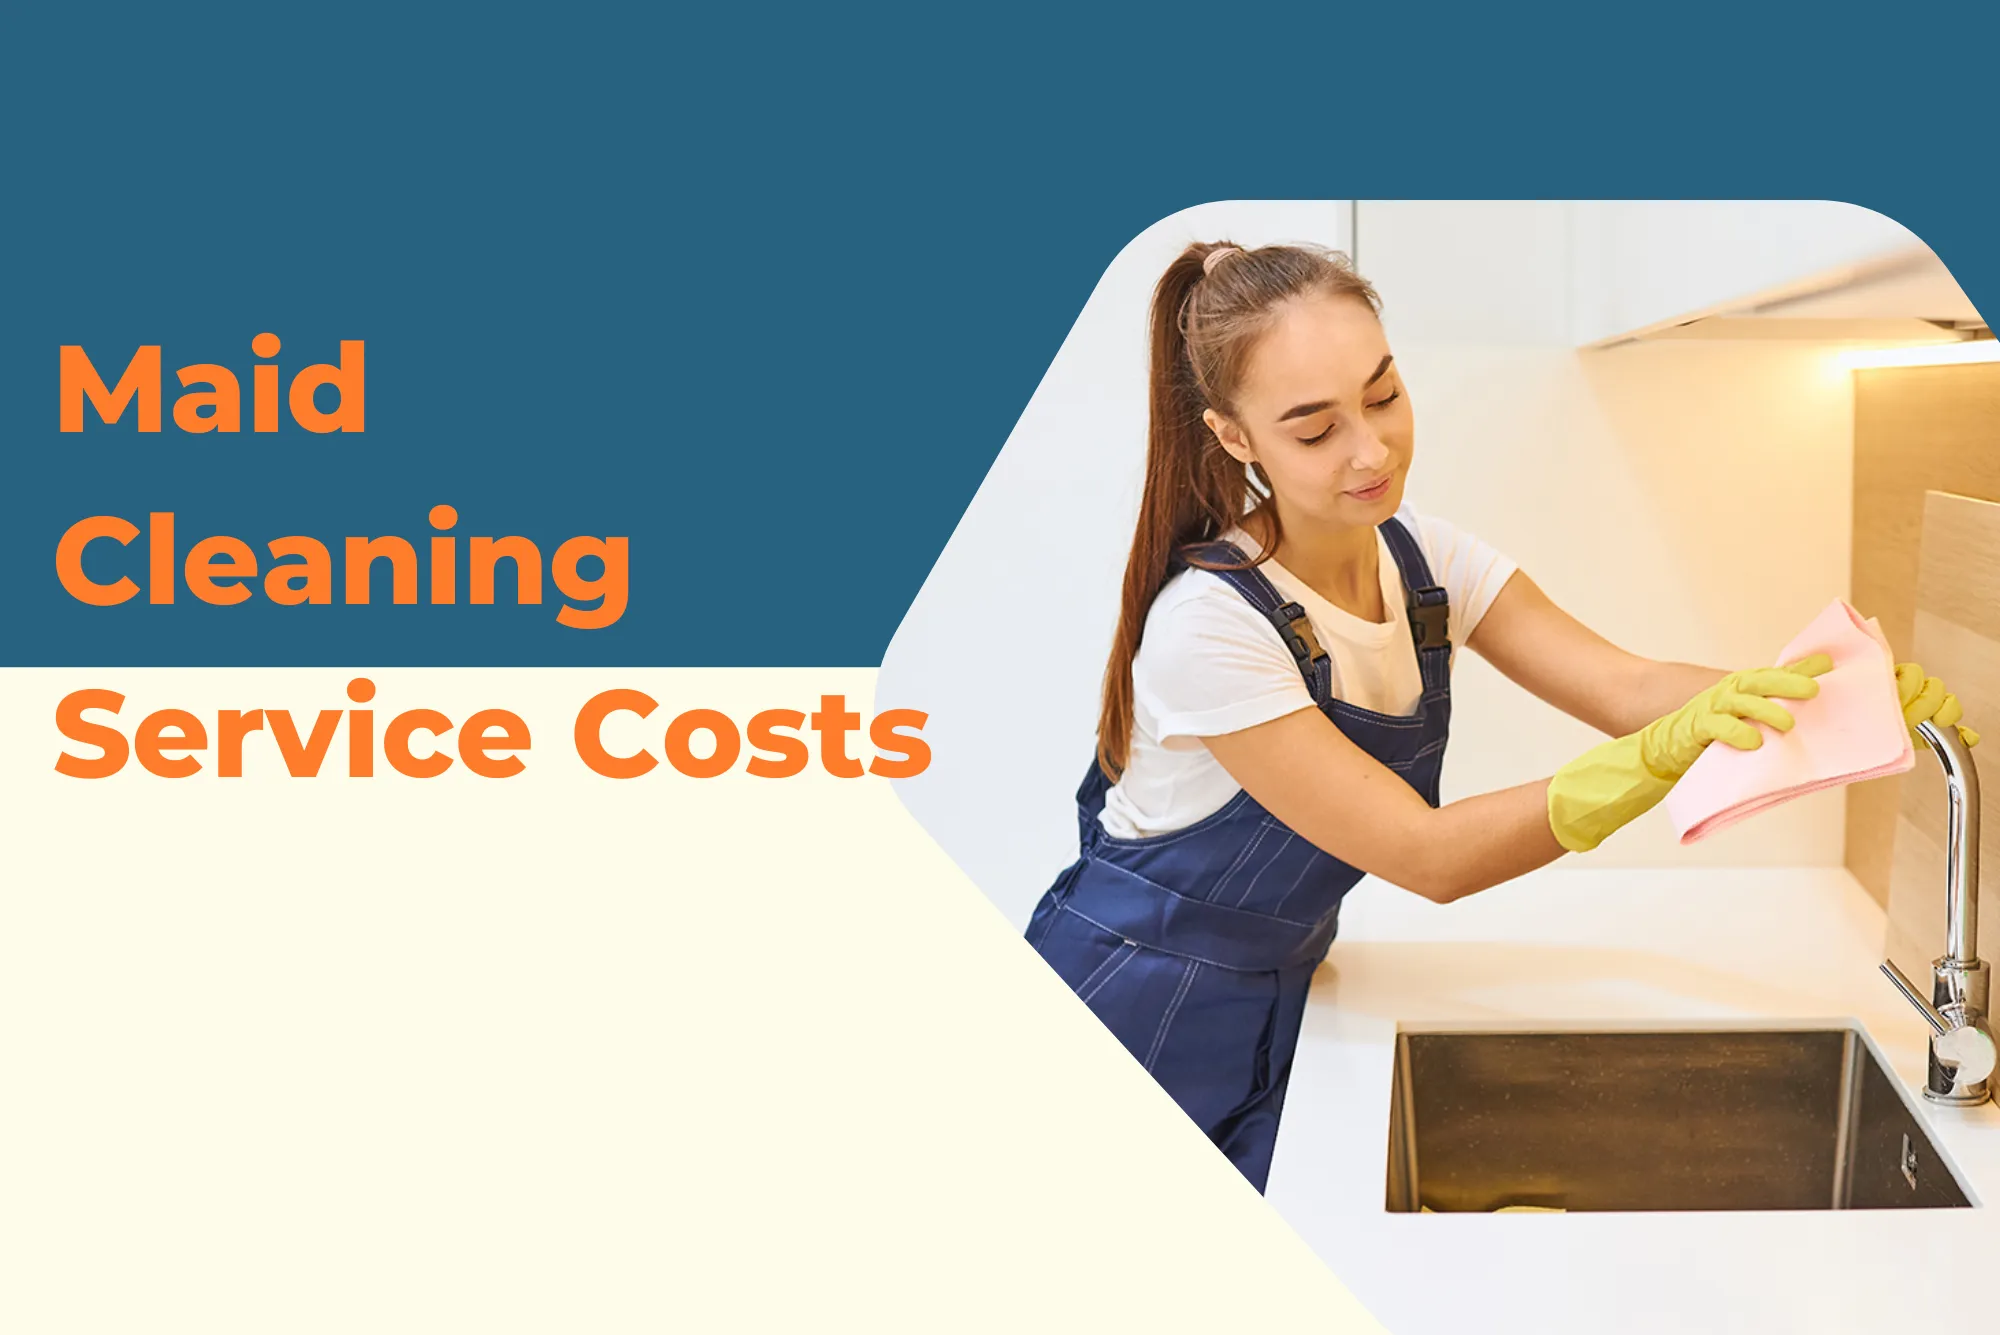 Maid Cleaning Service Costs